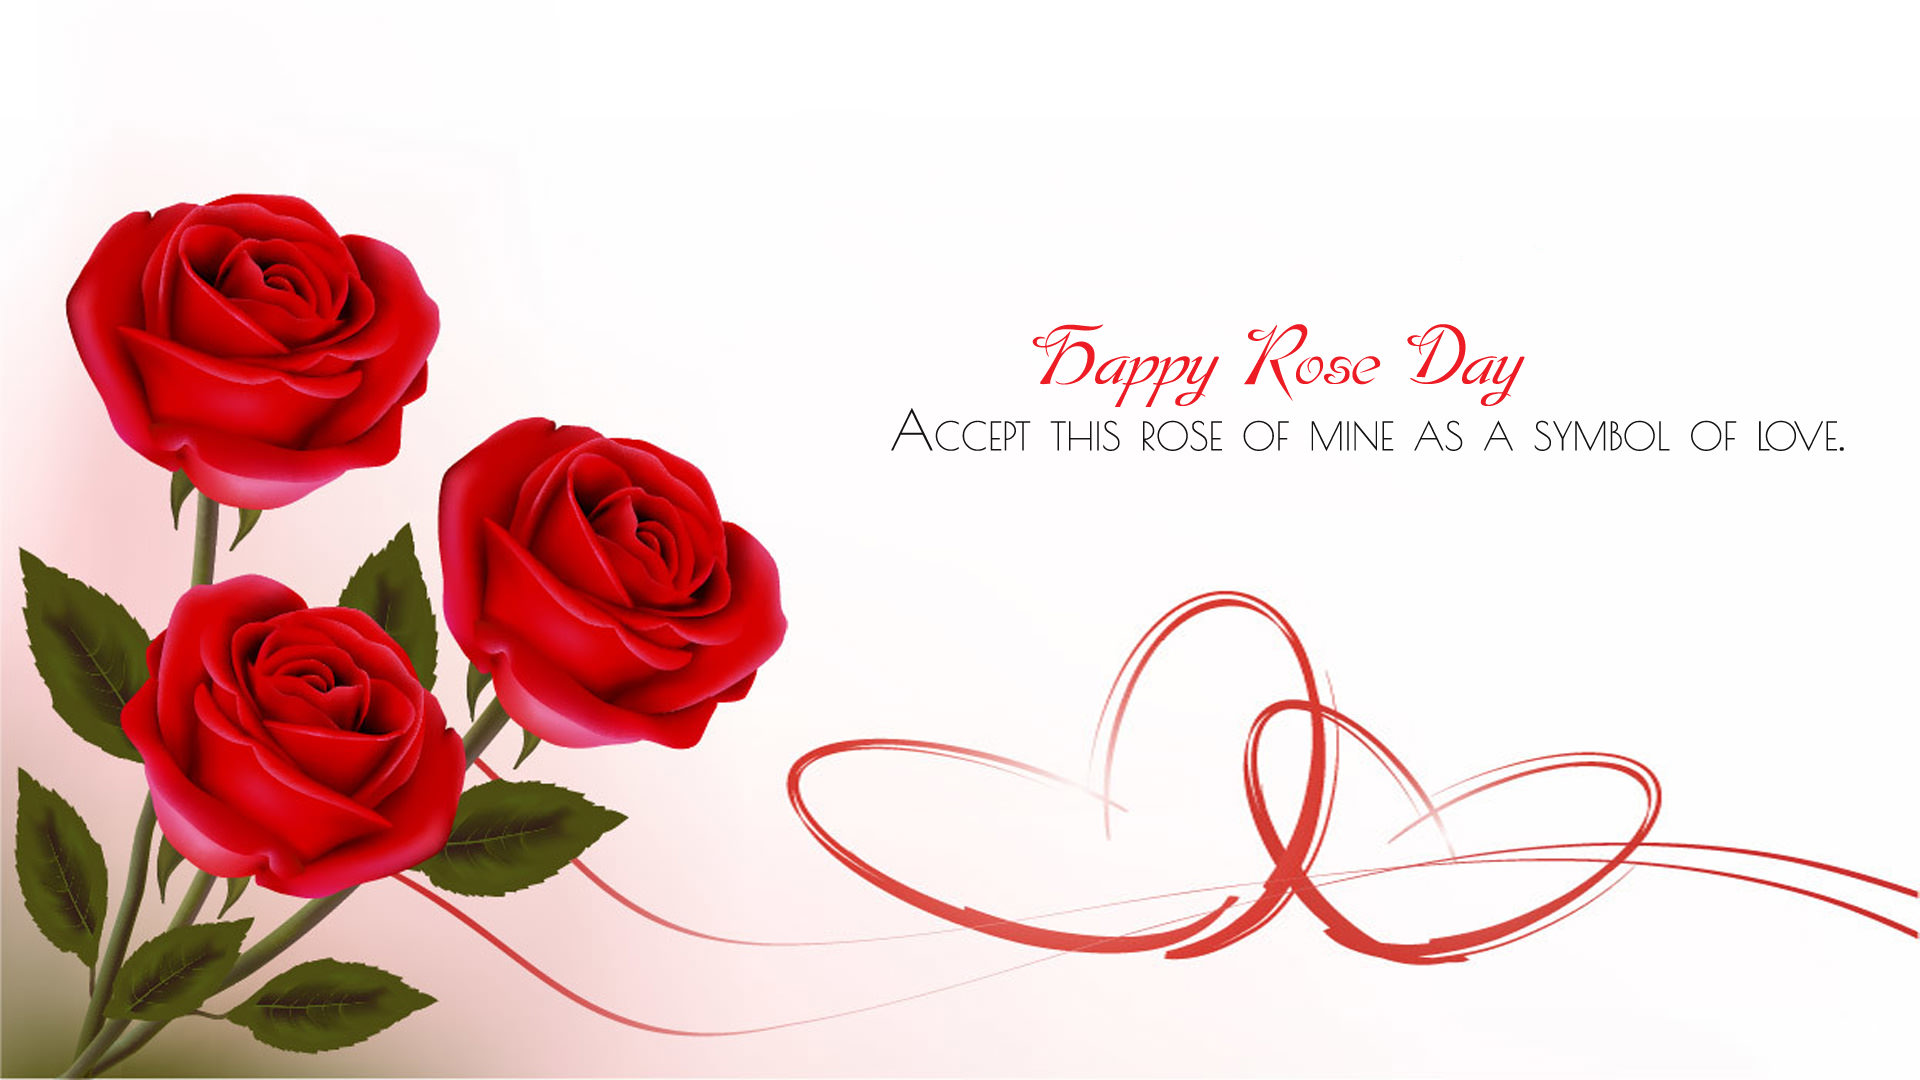 Rose Day Quotes on Wallpaper